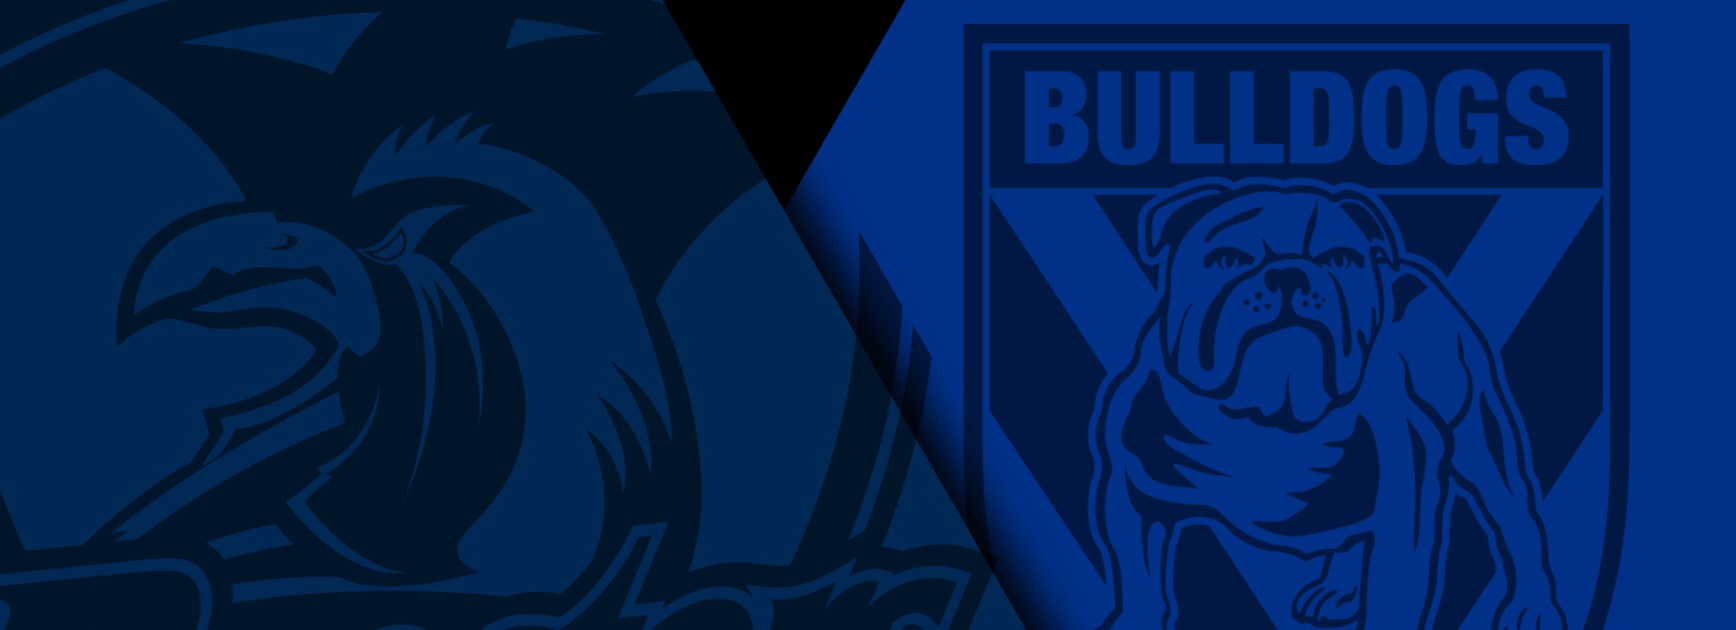 Roosters-Bulldogs preview.